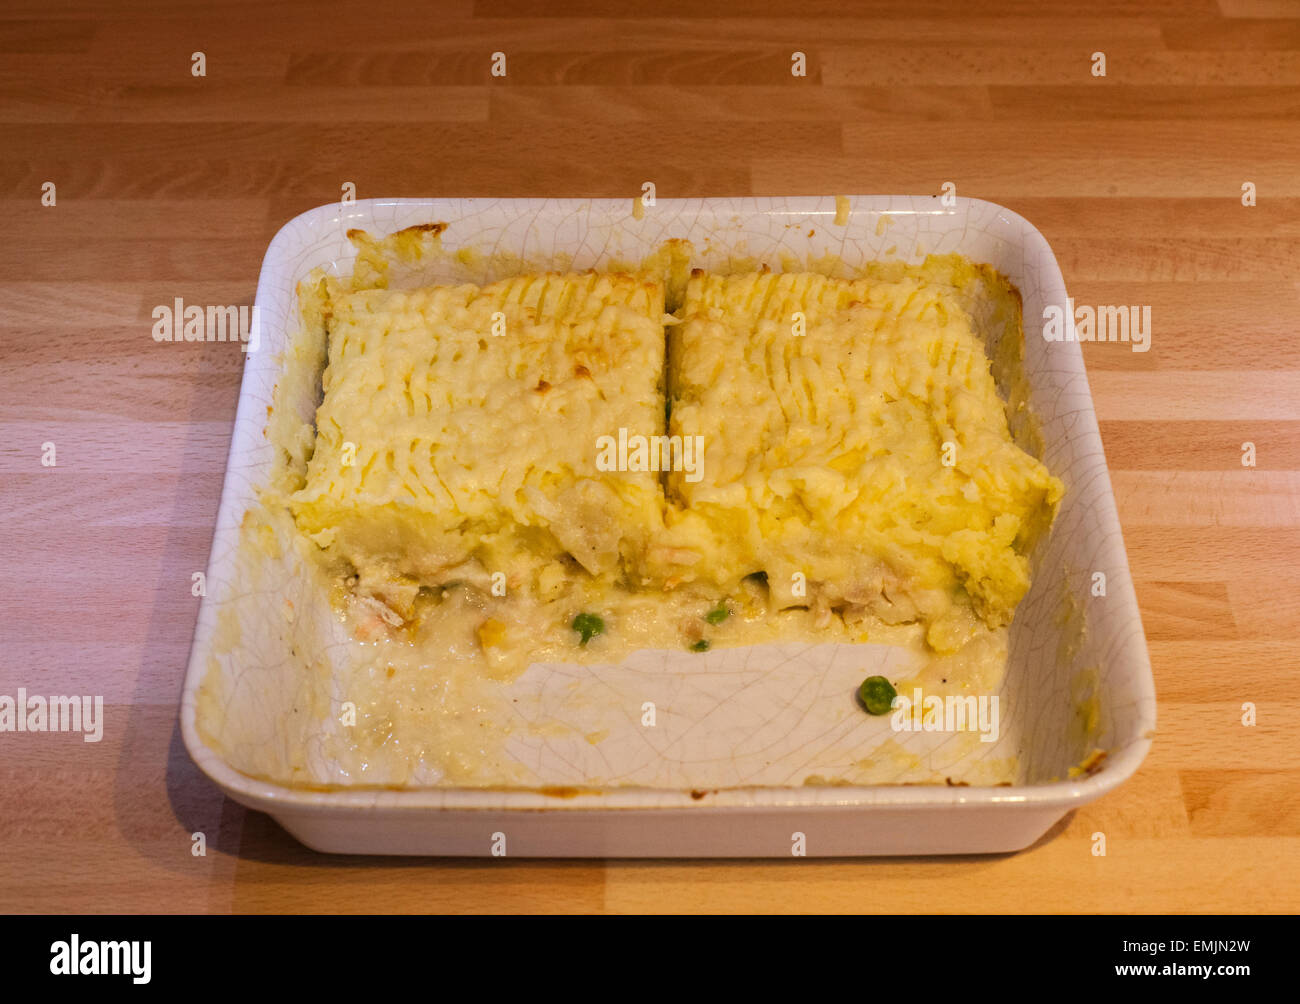 Fish pie half filling a pie dish, the other half having been served Stock Photo